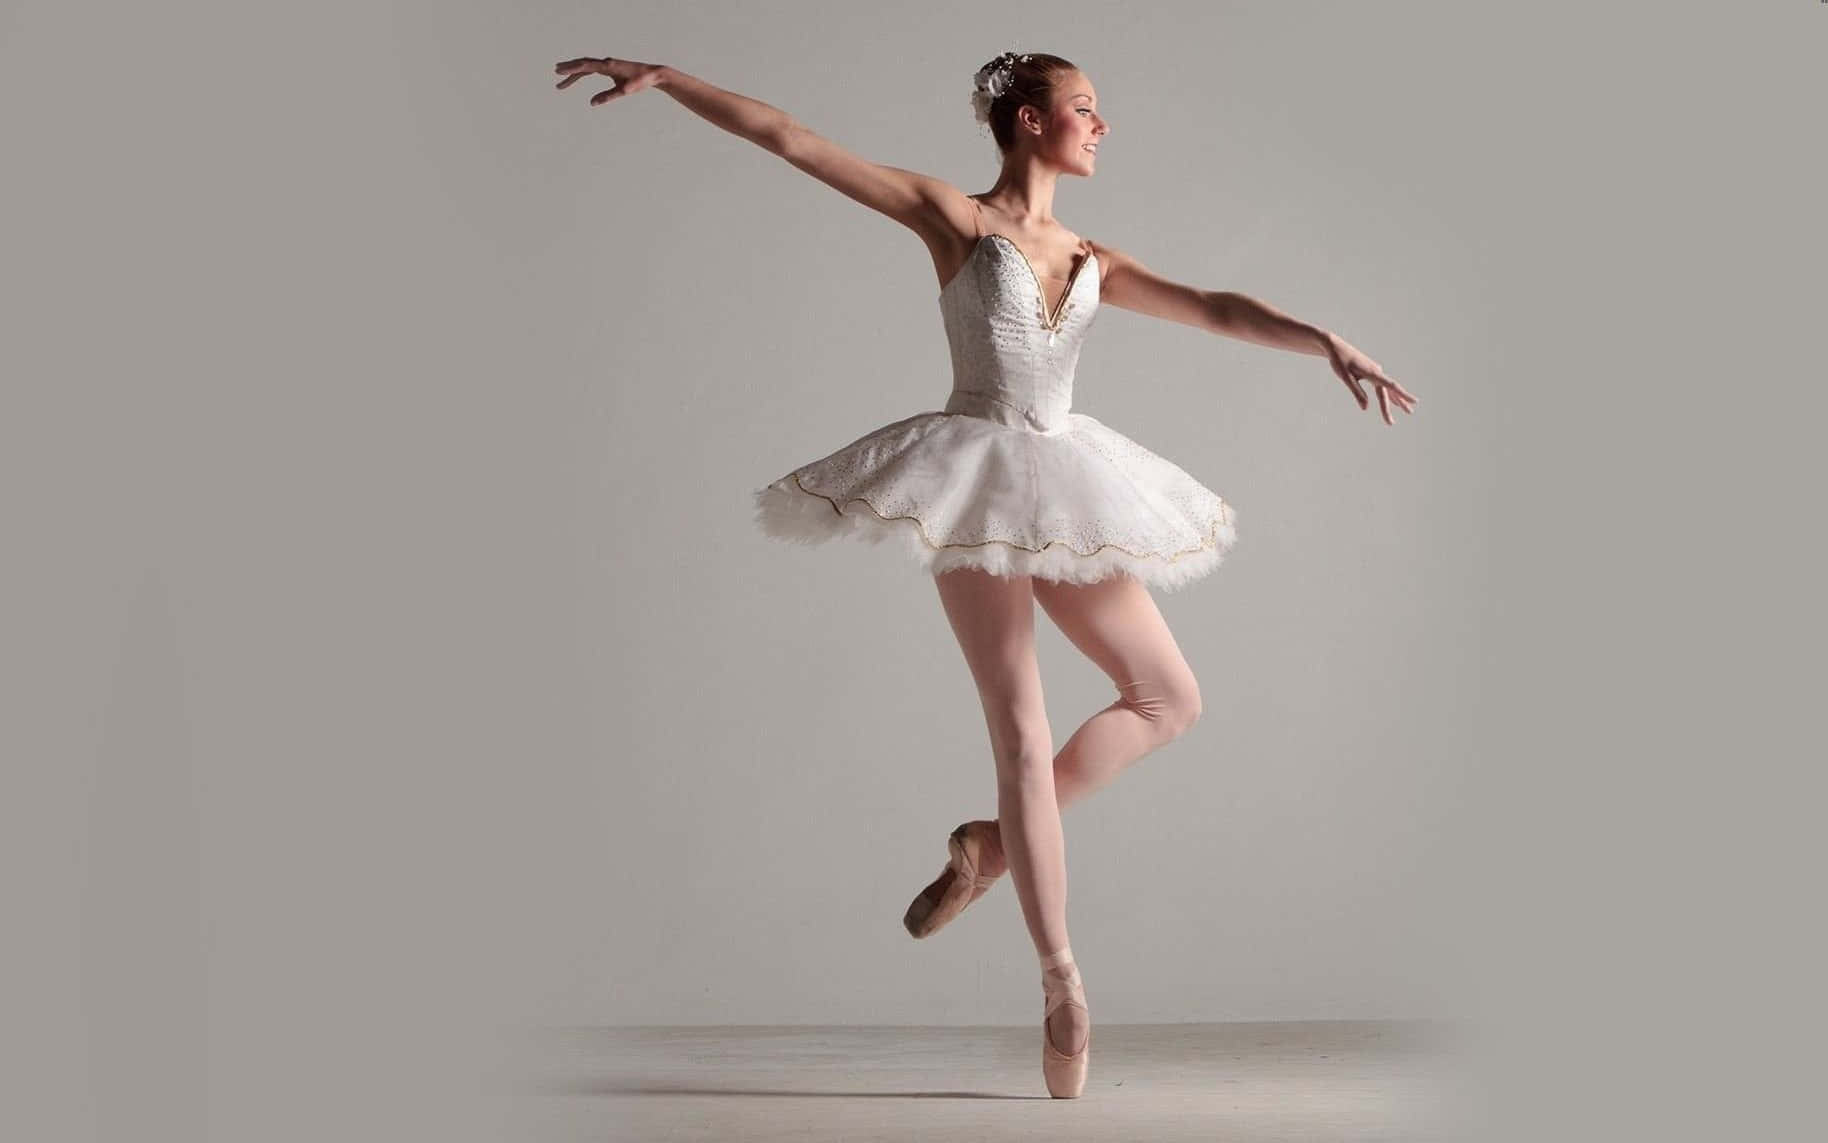 A passionate ballerina wearing pink pointe shoes. Wallpaper